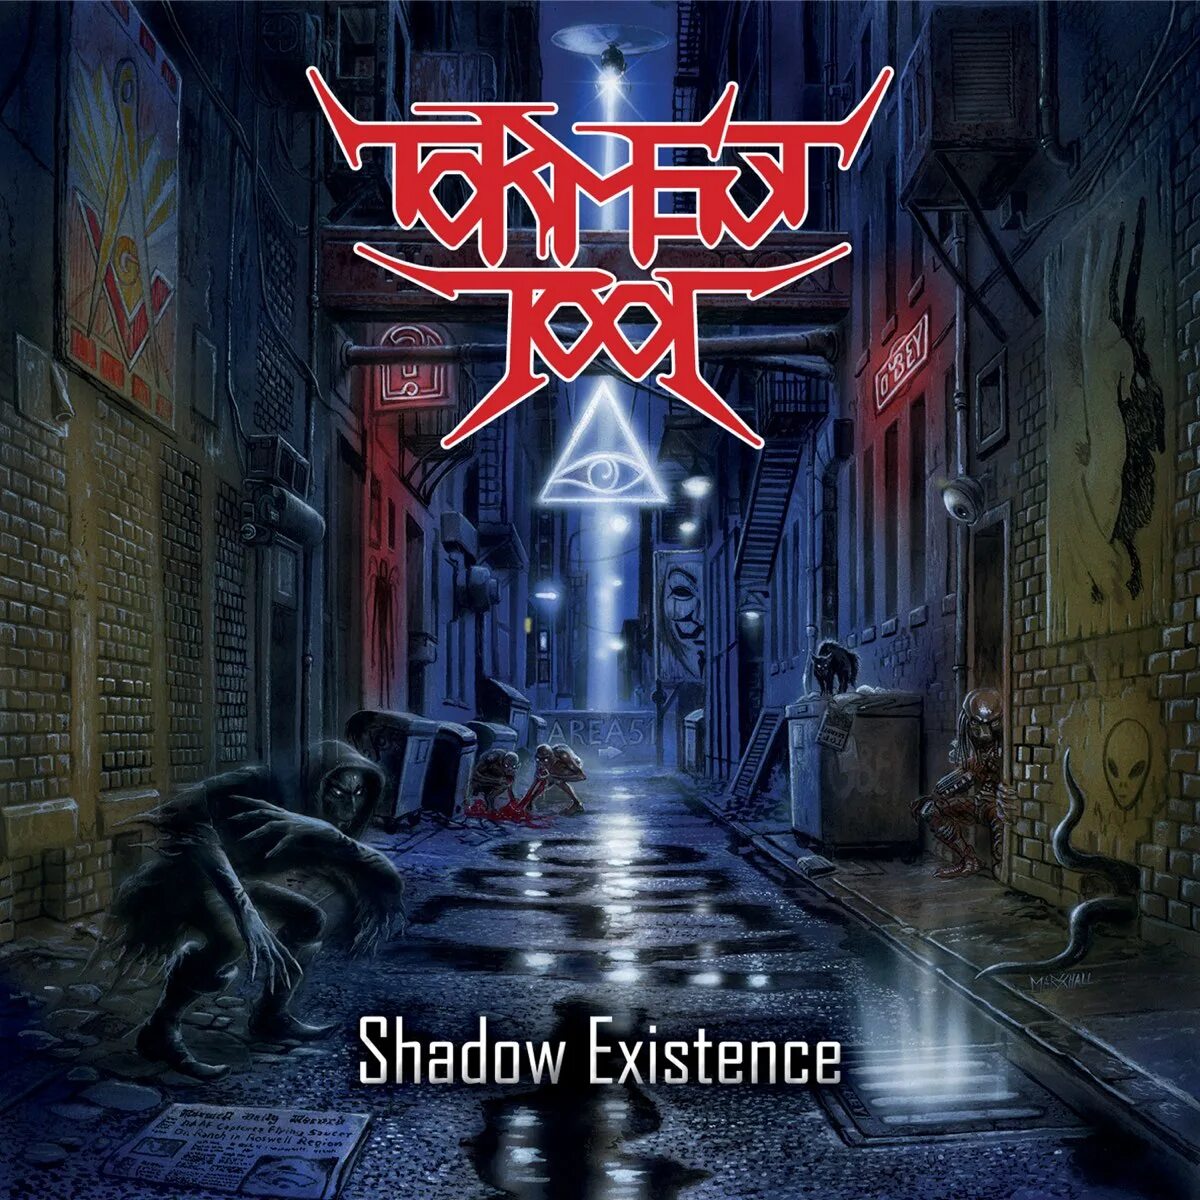 Standing shadows. Standing Shadows - existence. Tool альбомы. Pathfinder «Beyond the Space Beyond the time».